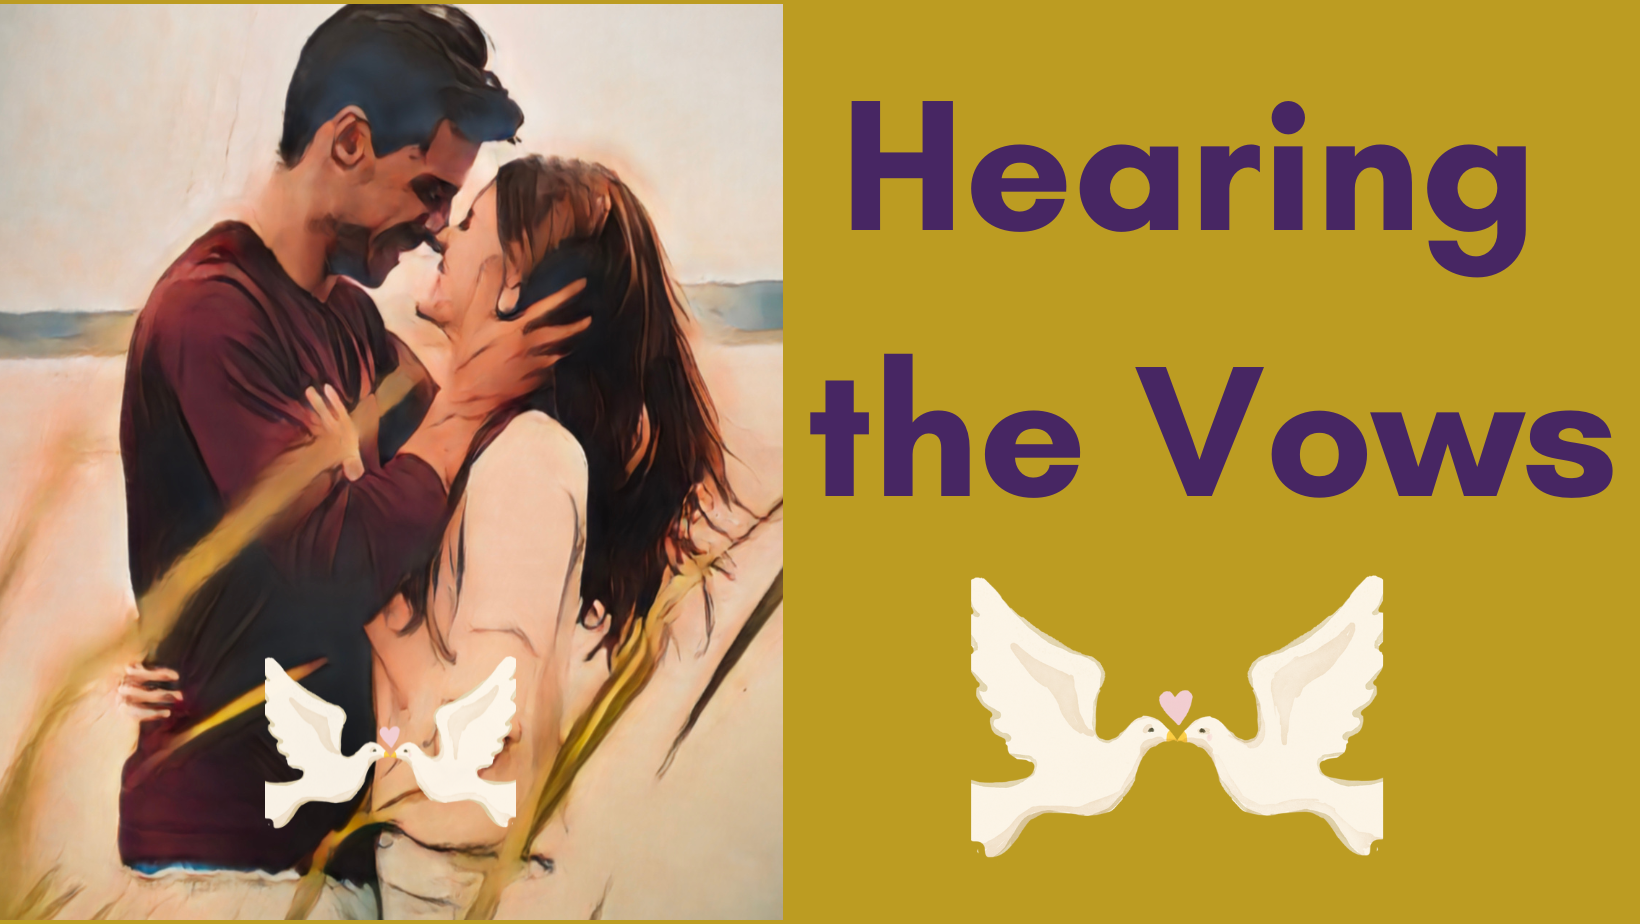 Featured image for “Hearing the Vows”